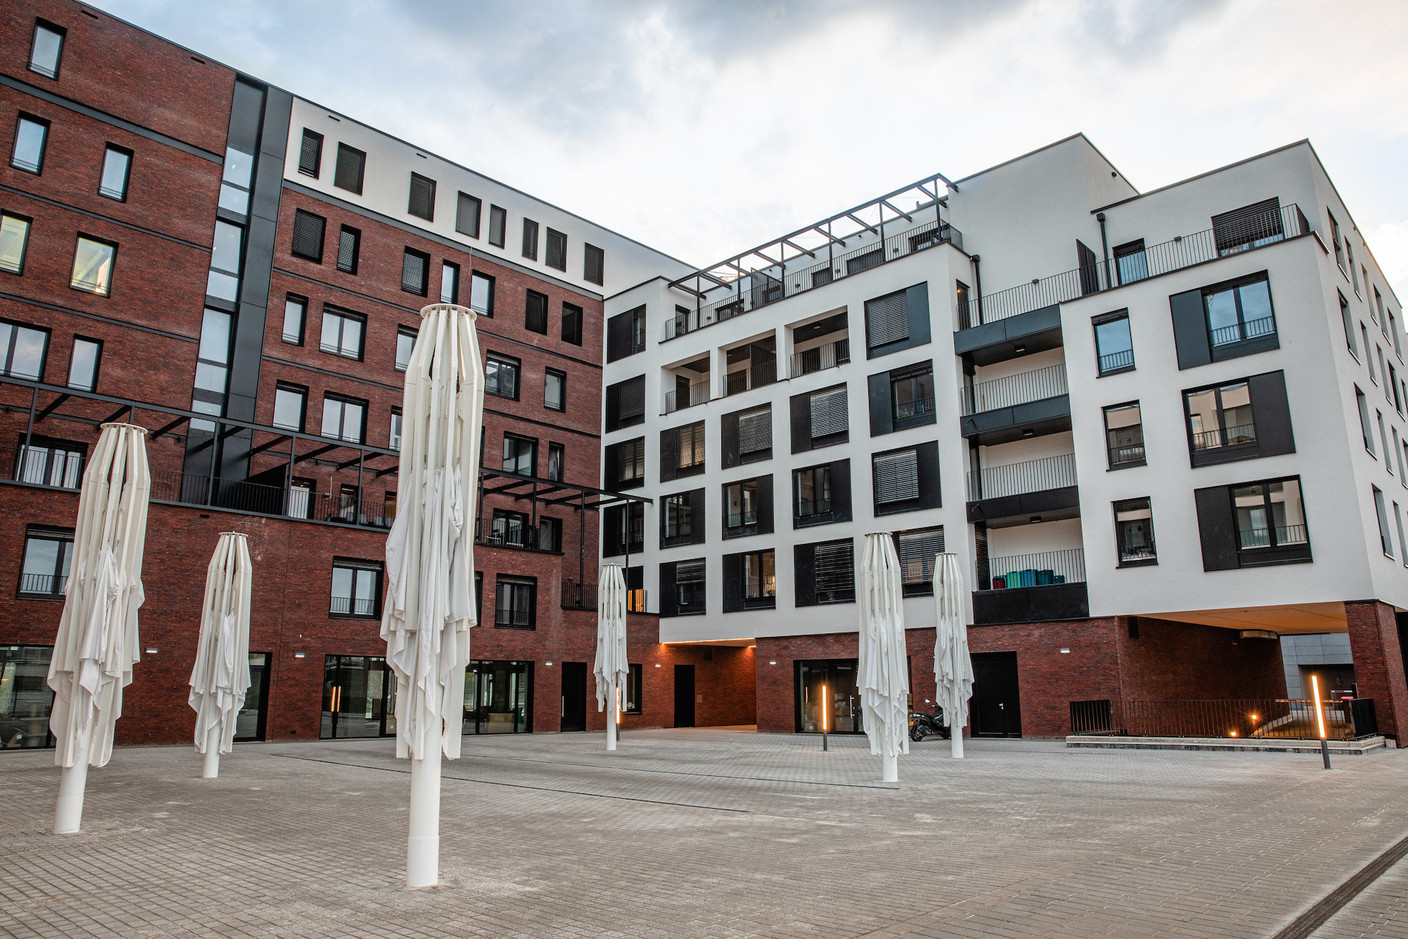 Several of the flats have access to an outdoor space. Photo: Cocoonut